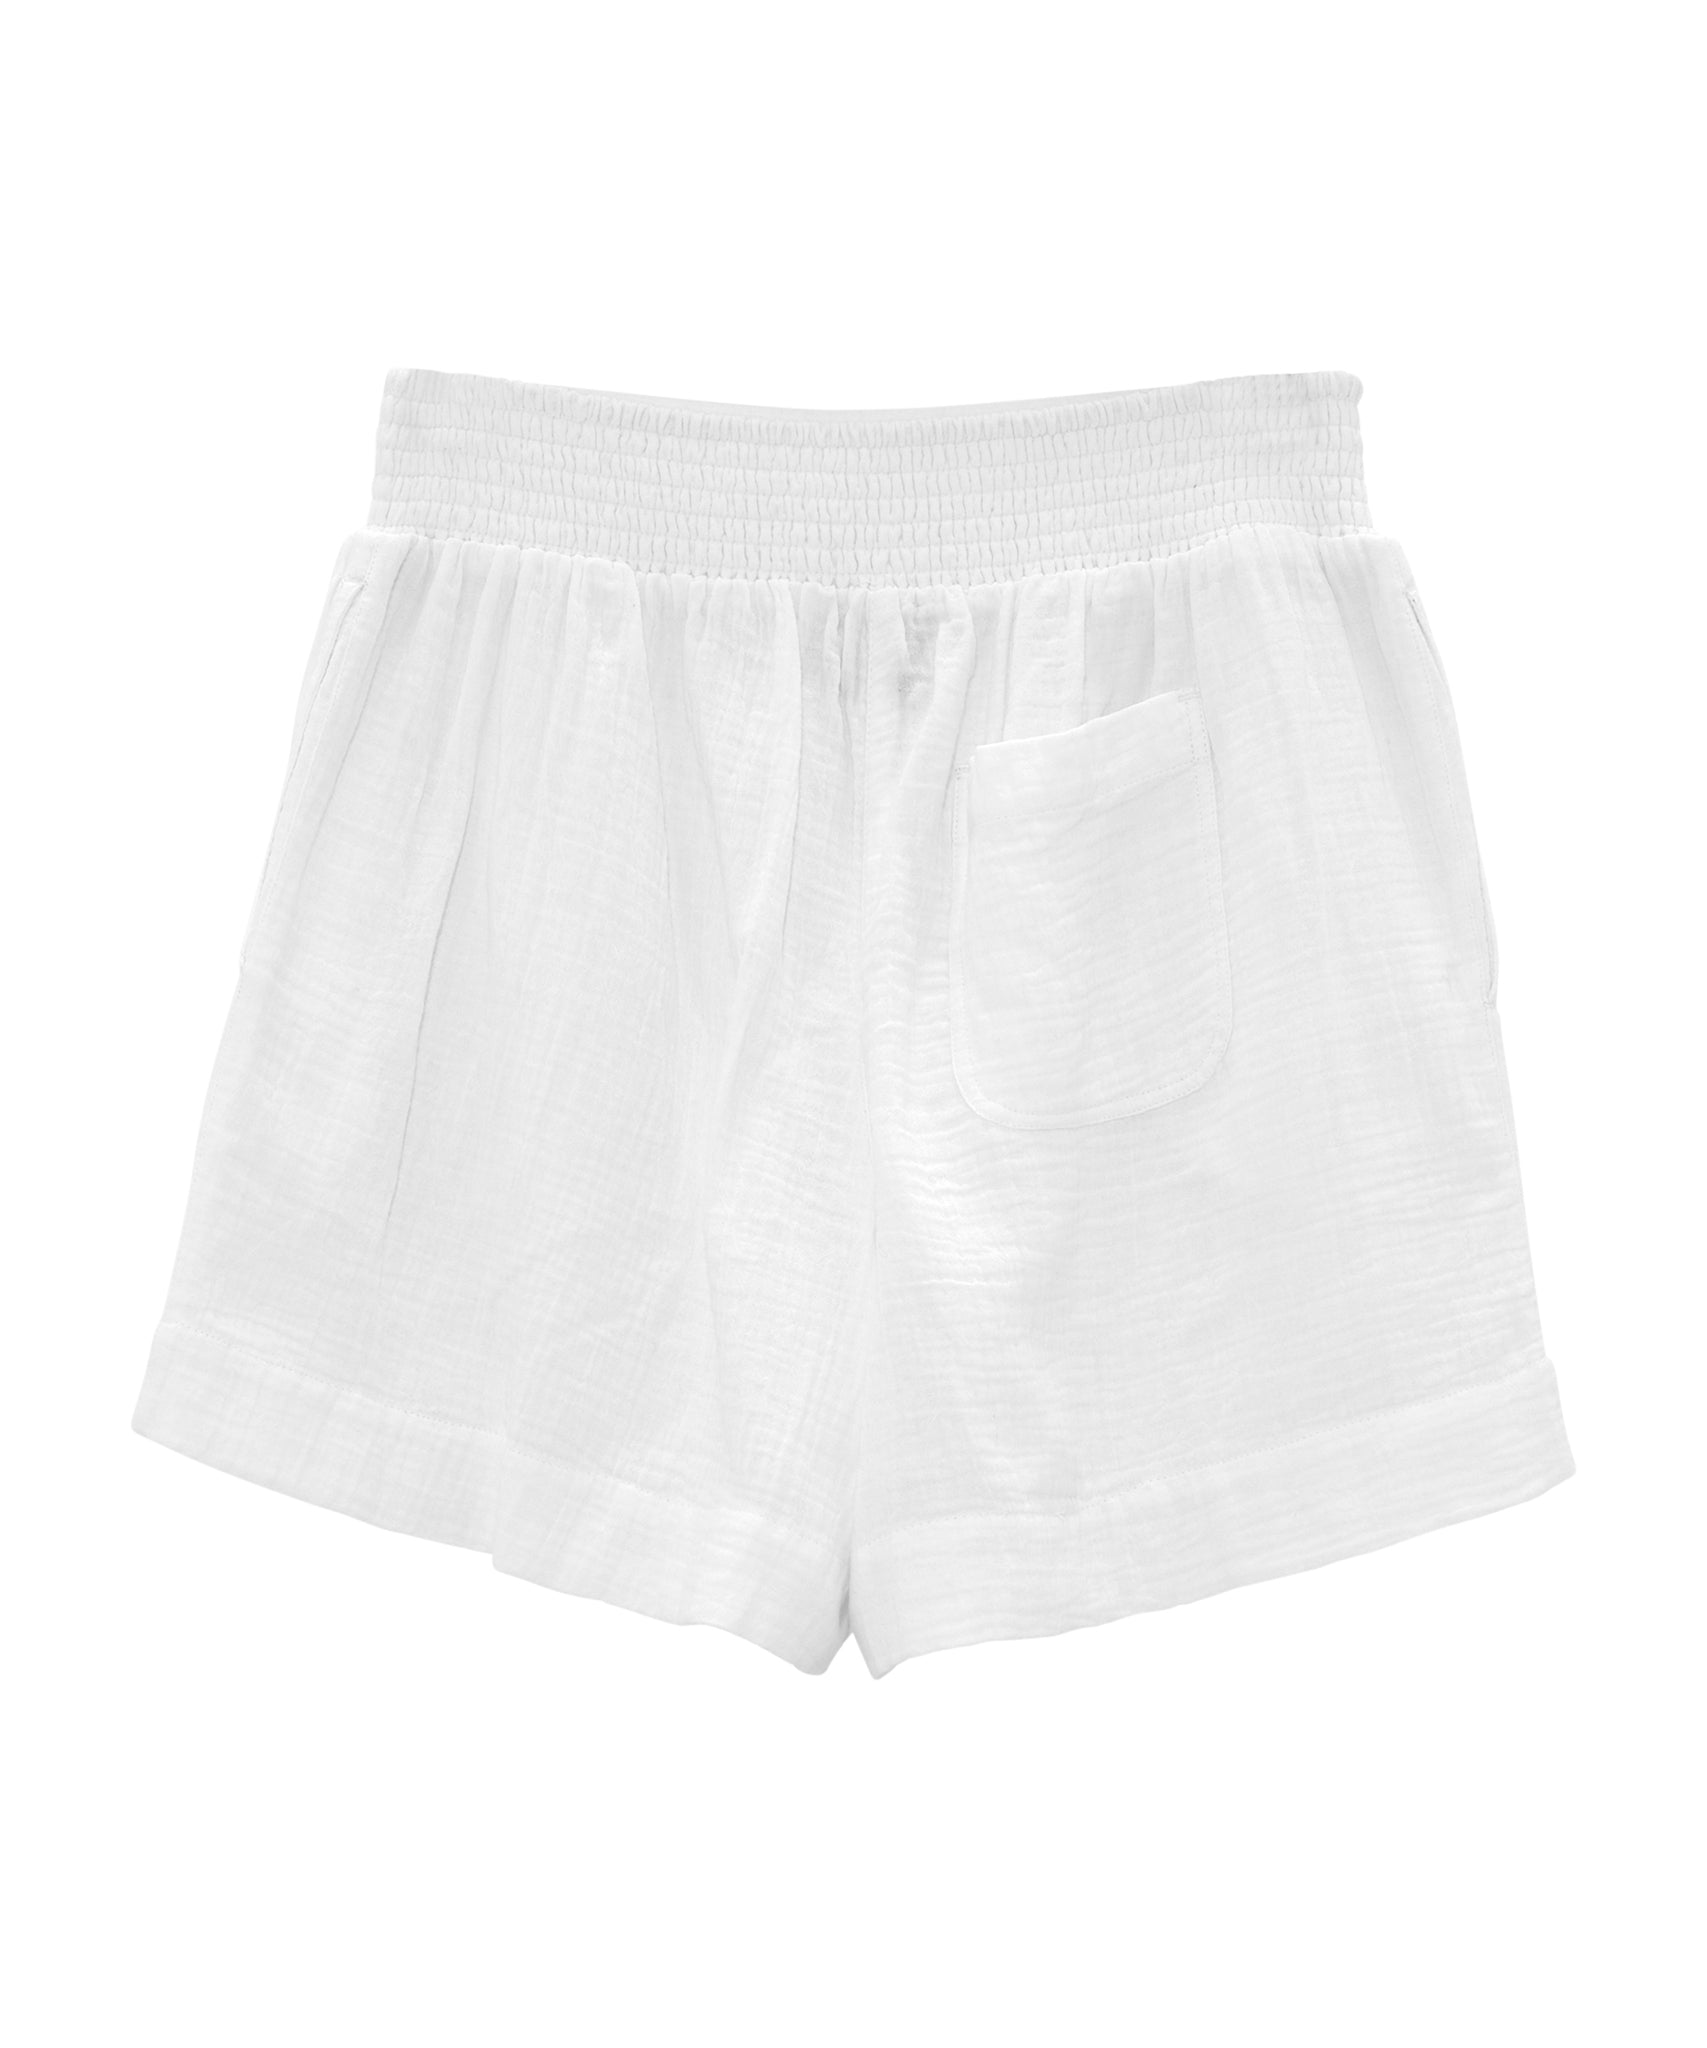 Supersoft Gauze Smocked Shorts in color white - back of shorts.